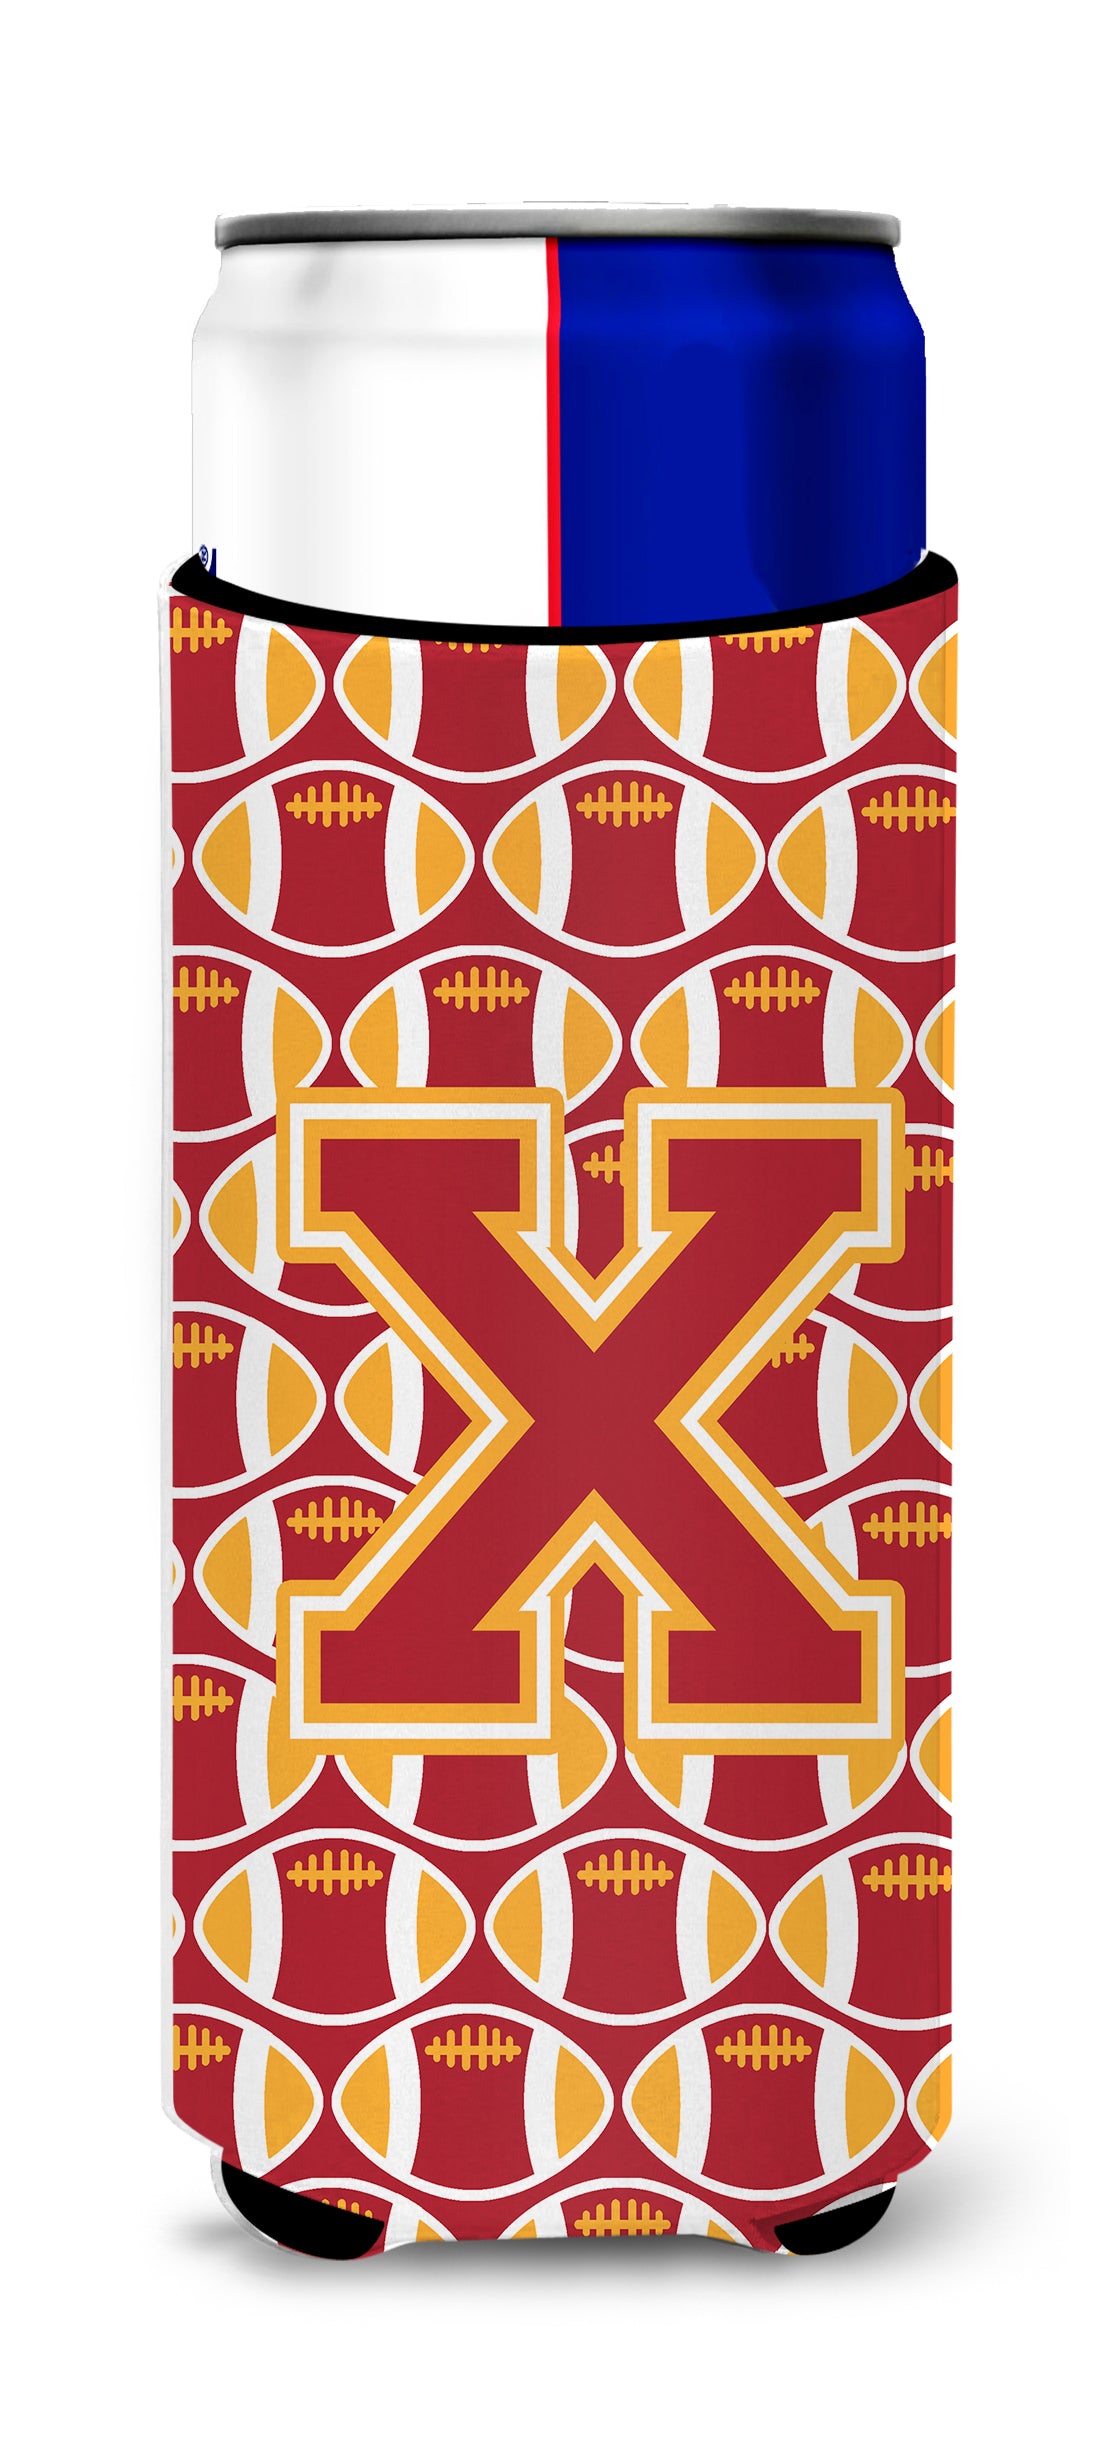 Letter X Football Cardinal and Gold Ultra Beverage Insulators for slim cans CJ1070-XMUK.